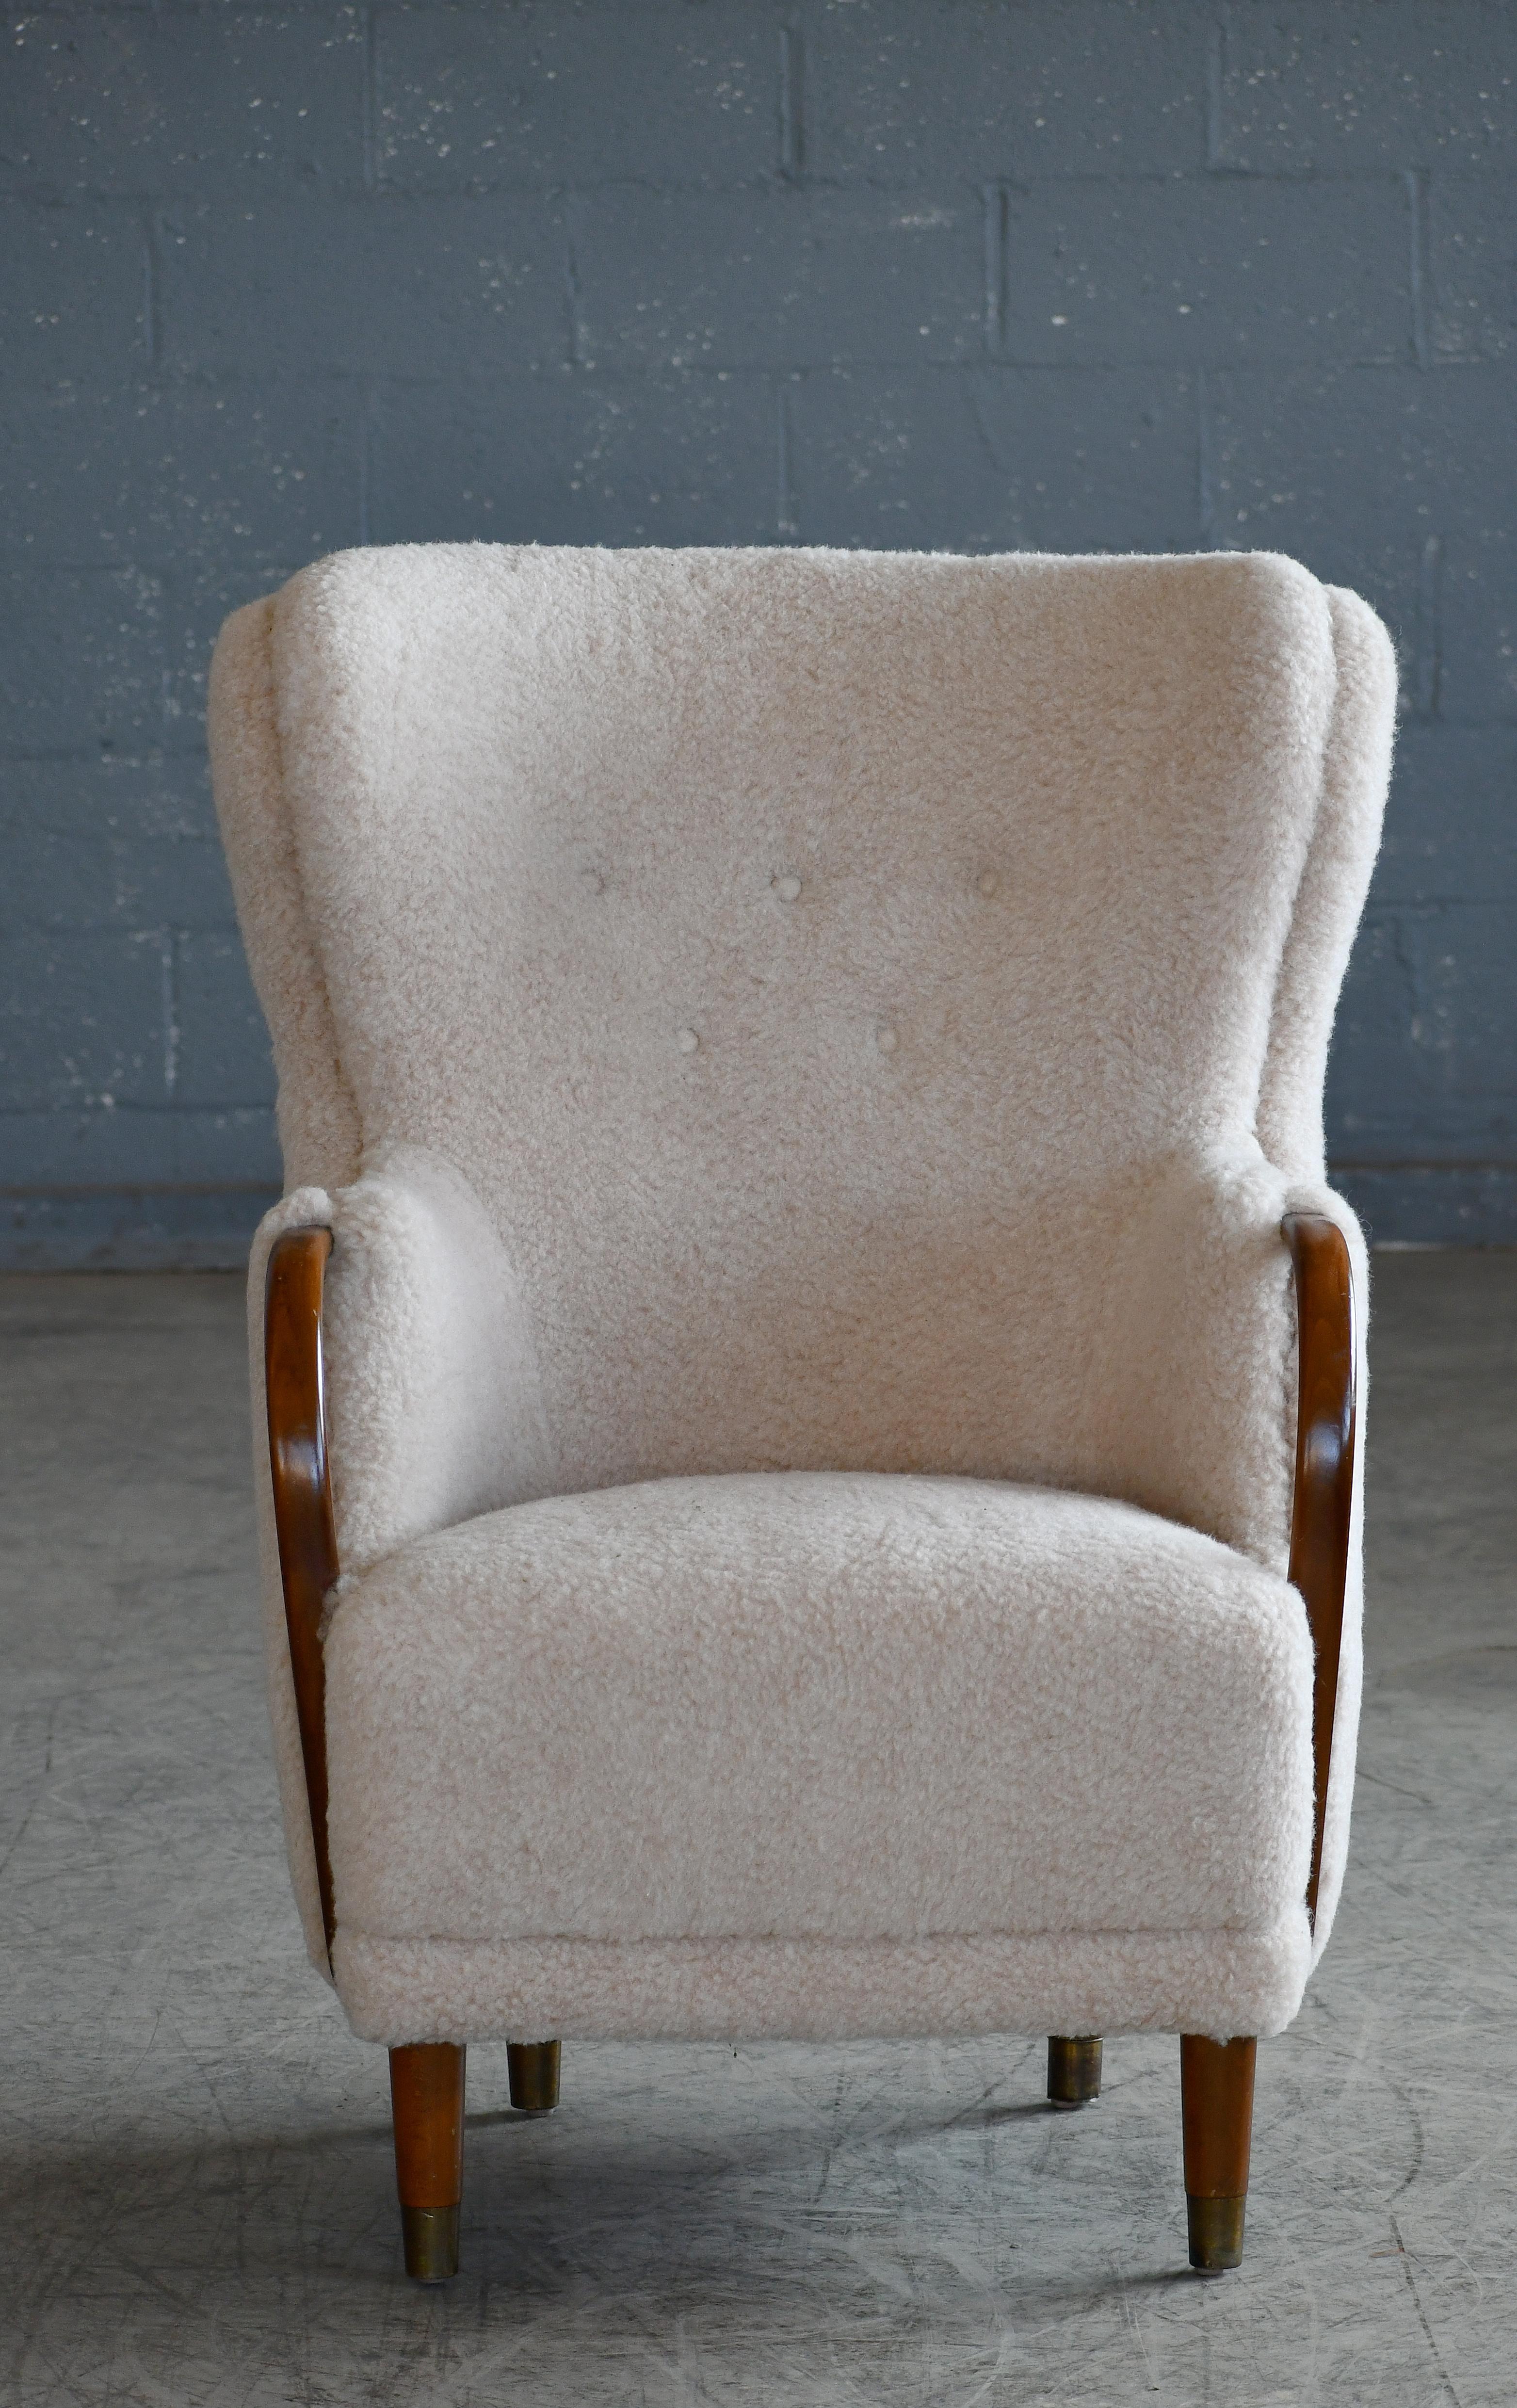 Unique and just superb curved armchair with open armrests designed and made as Model 96 by N.A. Jørgensens Møbelfabrik in 1954-1955. Very rare find. N.A. Jørgensen is better known under the name Bramin Mobler a name they adopted in the 1960s.